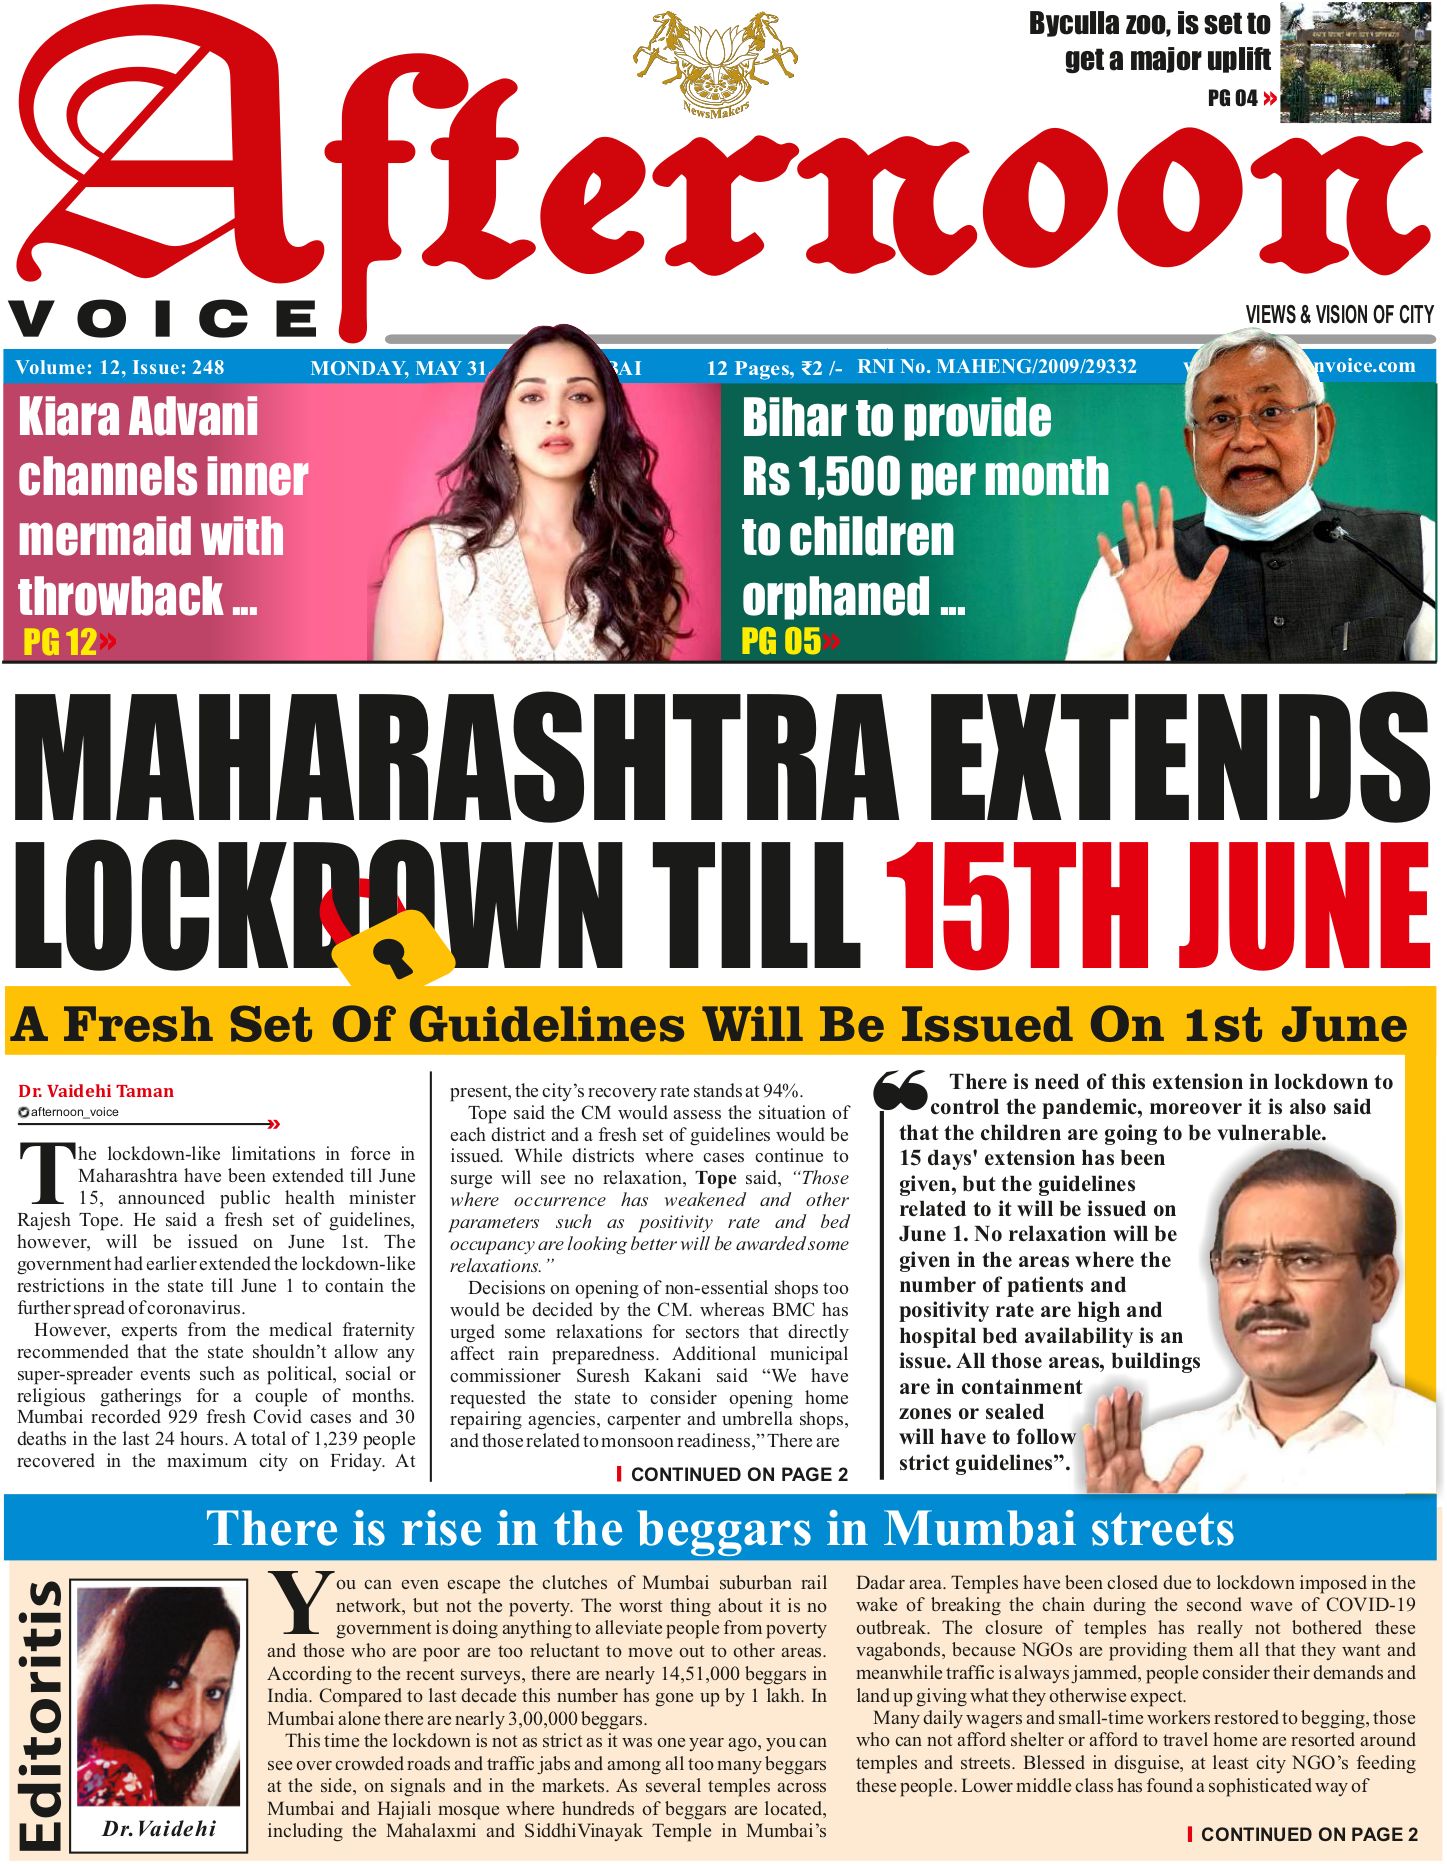 31 May 21 Page 1 Online English News Paper Daily News Epaper Today Newspaper